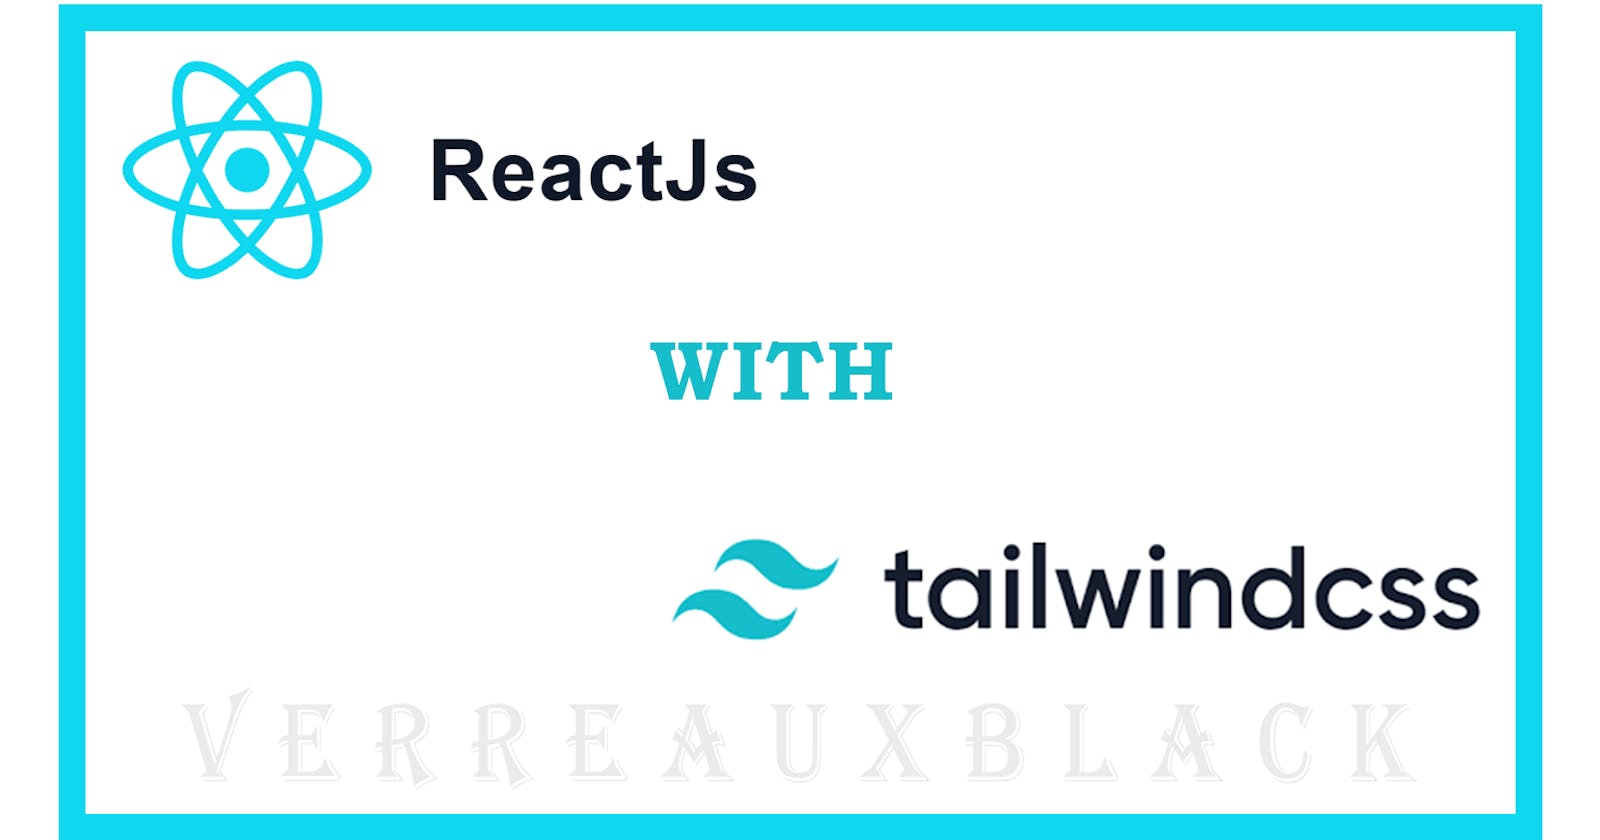 How to use TailwindCSS with ReactJs